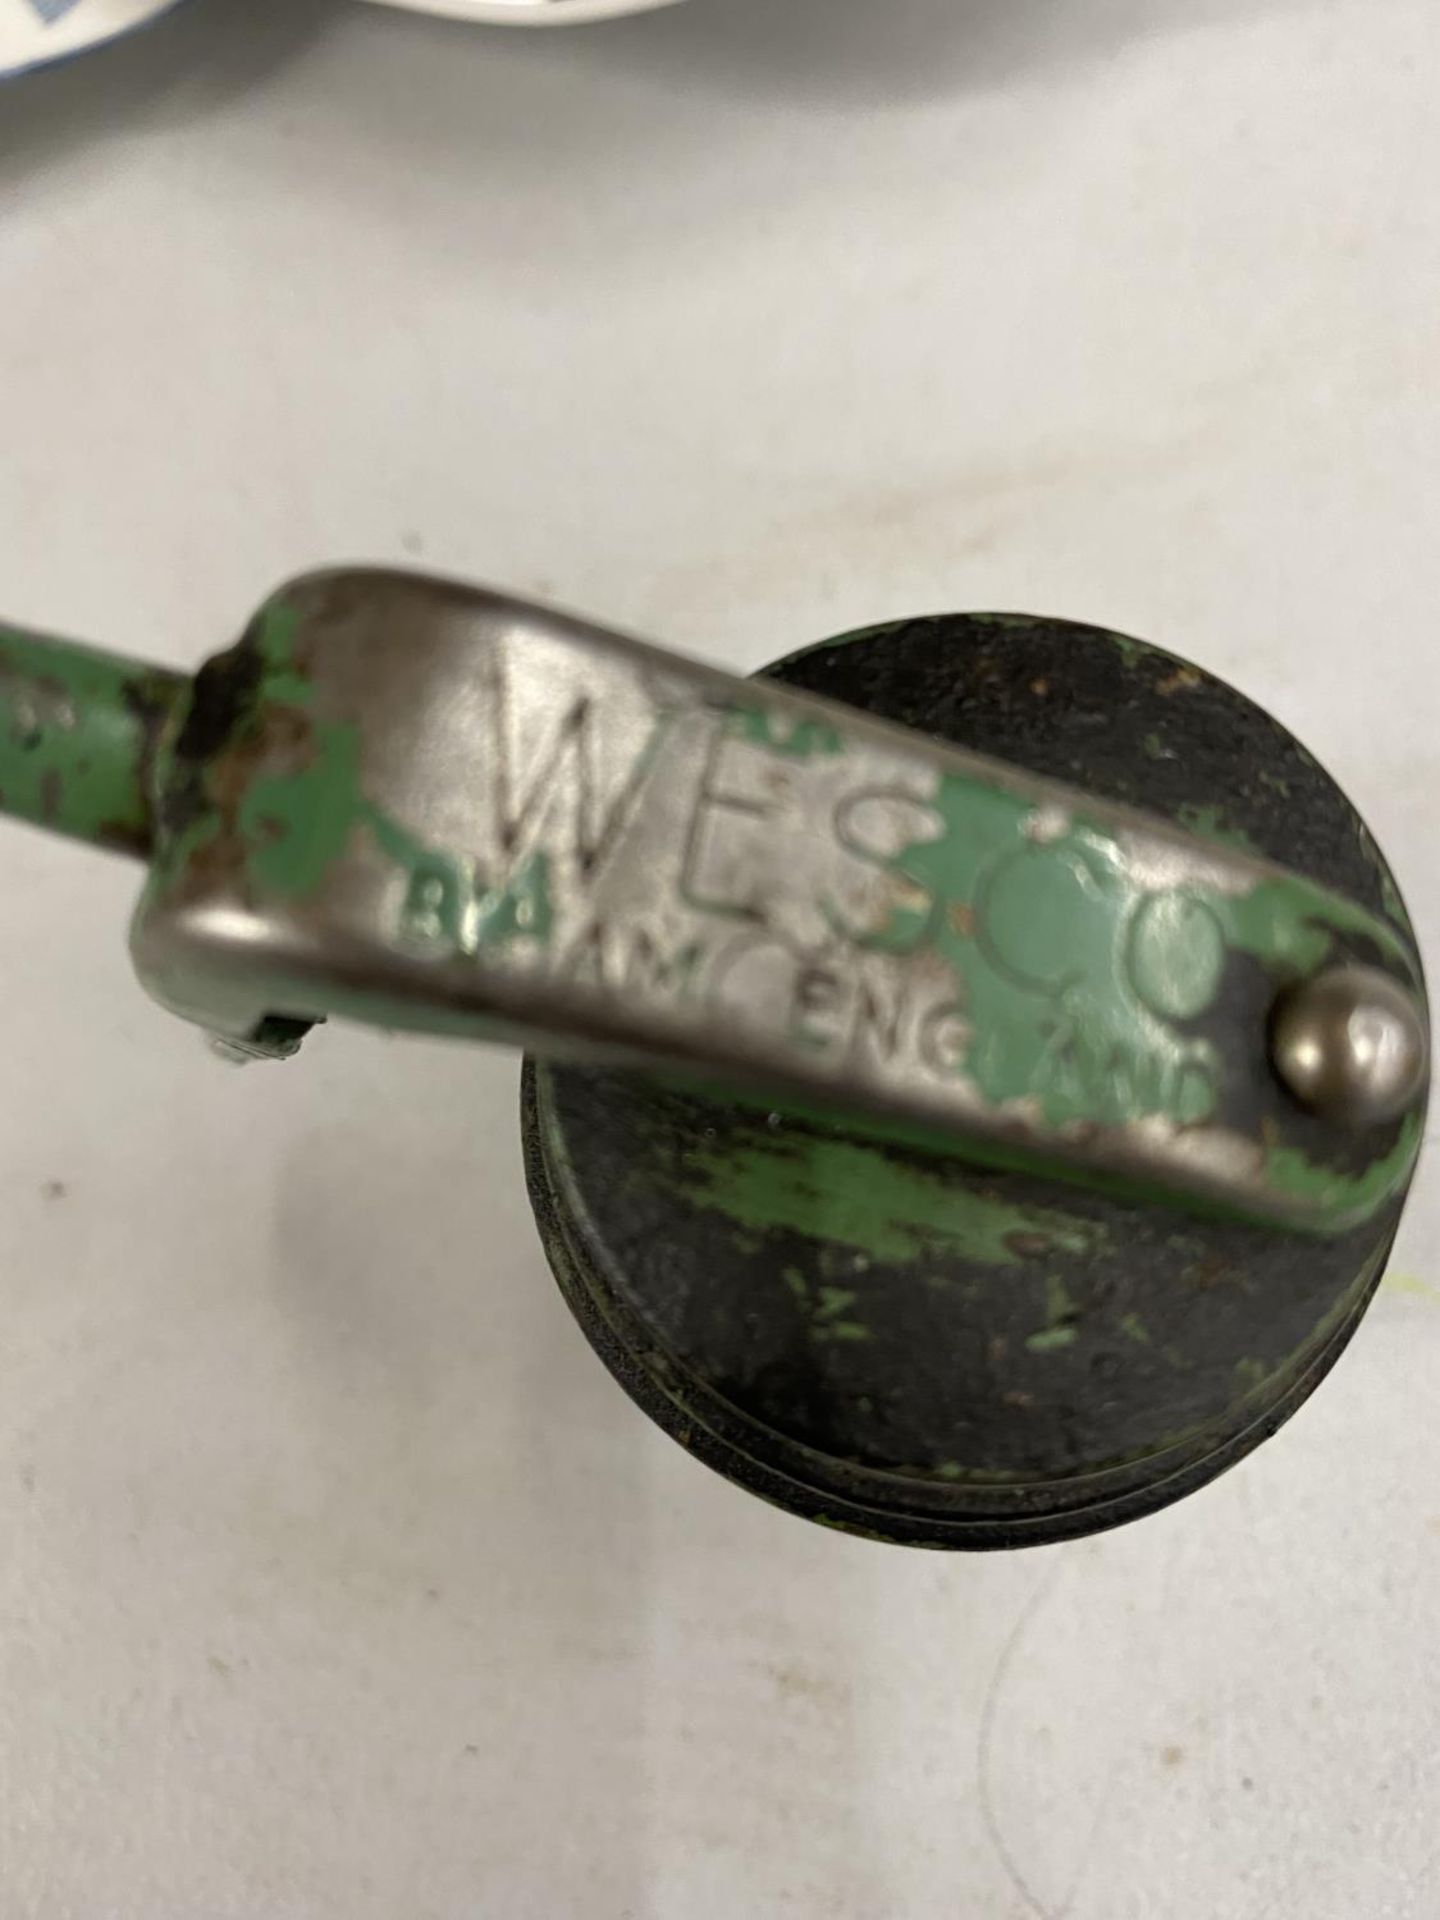 A VINTAGE WESTCO OIL CAN - Image 7 of 8